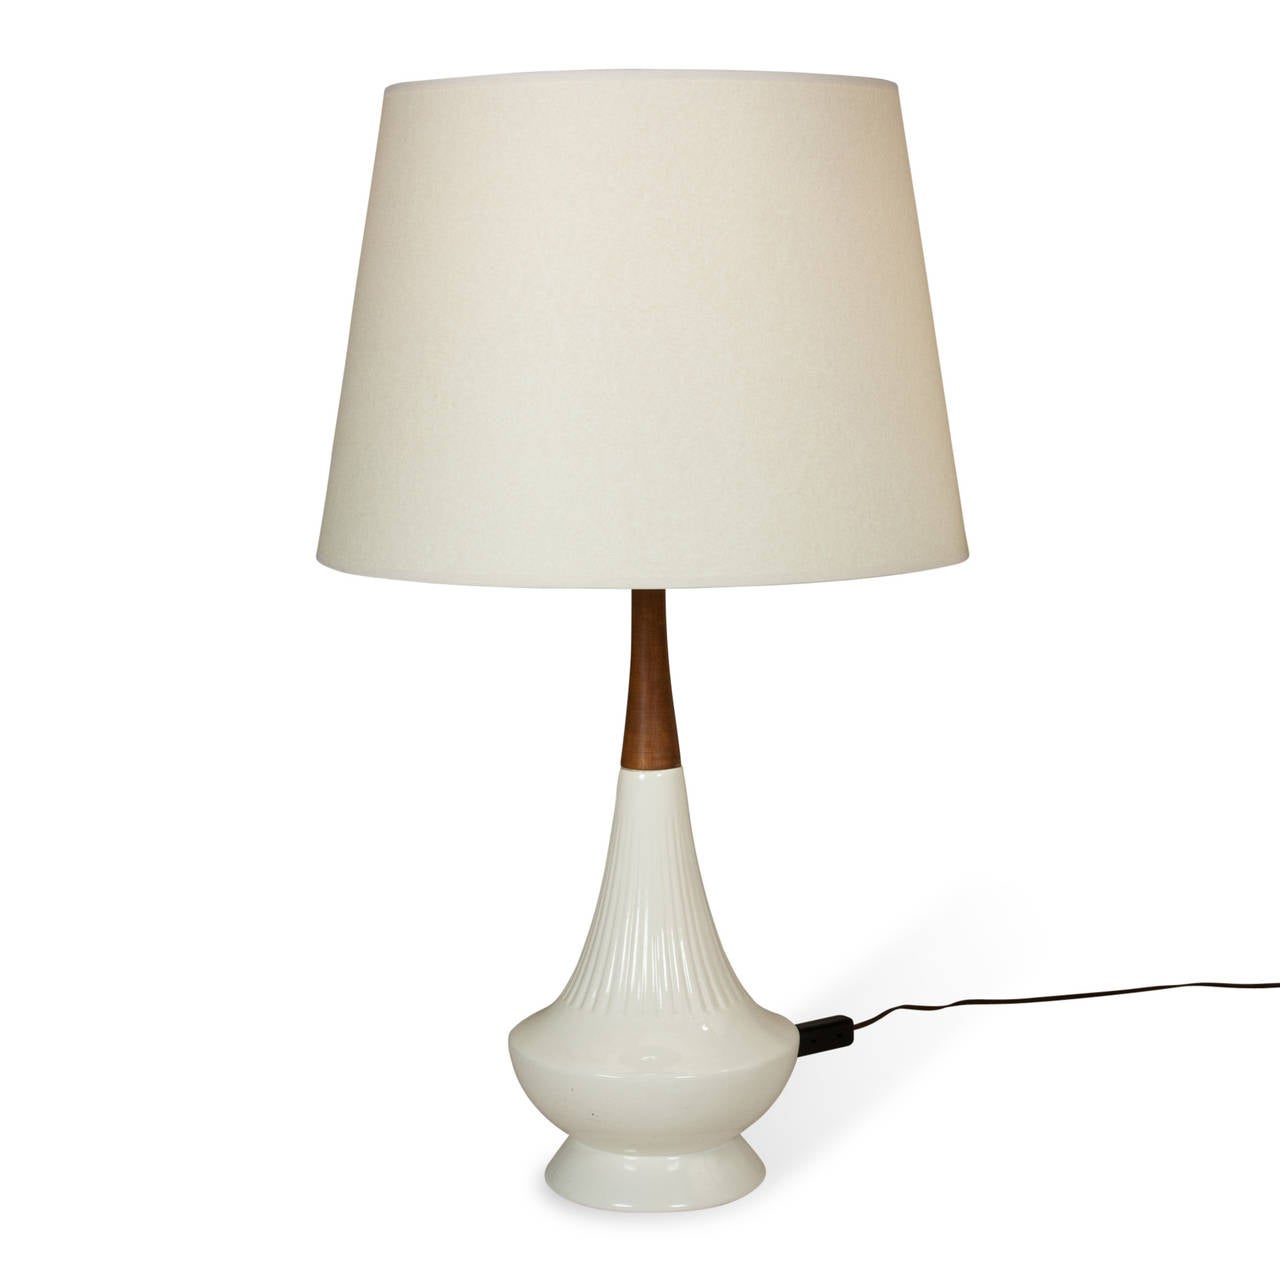 White ceramic table lamps, tapered form with walnut necks, Danish 1950s. Overall height 30 in. Height to top of wood 20 in. Largest diameter of base 8 in. Custom silk shades measure top diameter 14 in, bottom diameter 18 in, height 12 in. (Item